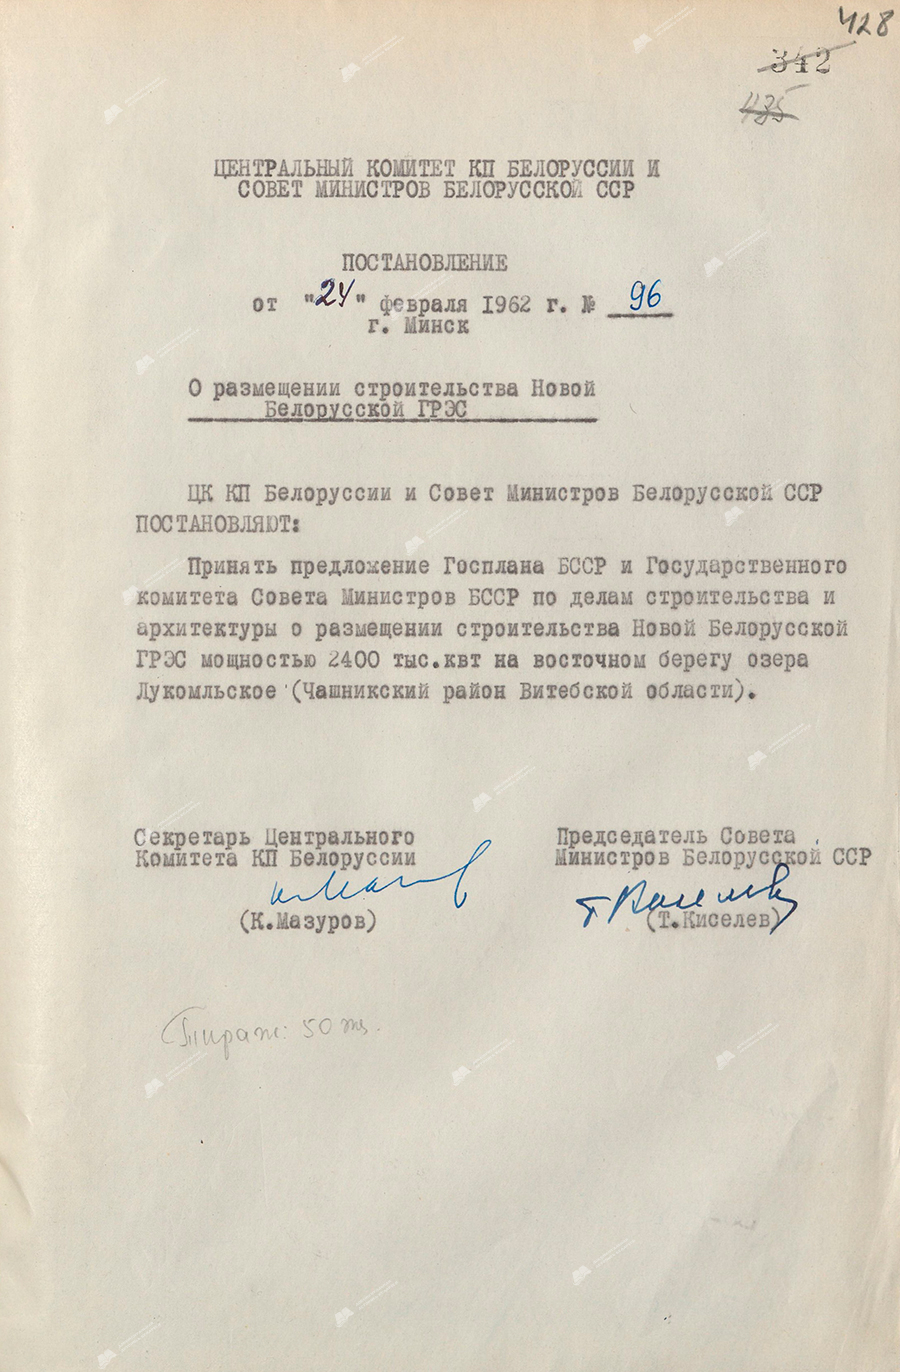 Resolution No. 96 of the Central Committee of the Communist Party of Belarus and the Council of Ministers of the BSSR «On the location of the construction of the New Belarusian State Regional Power Plant of the BSSR»-с. 0